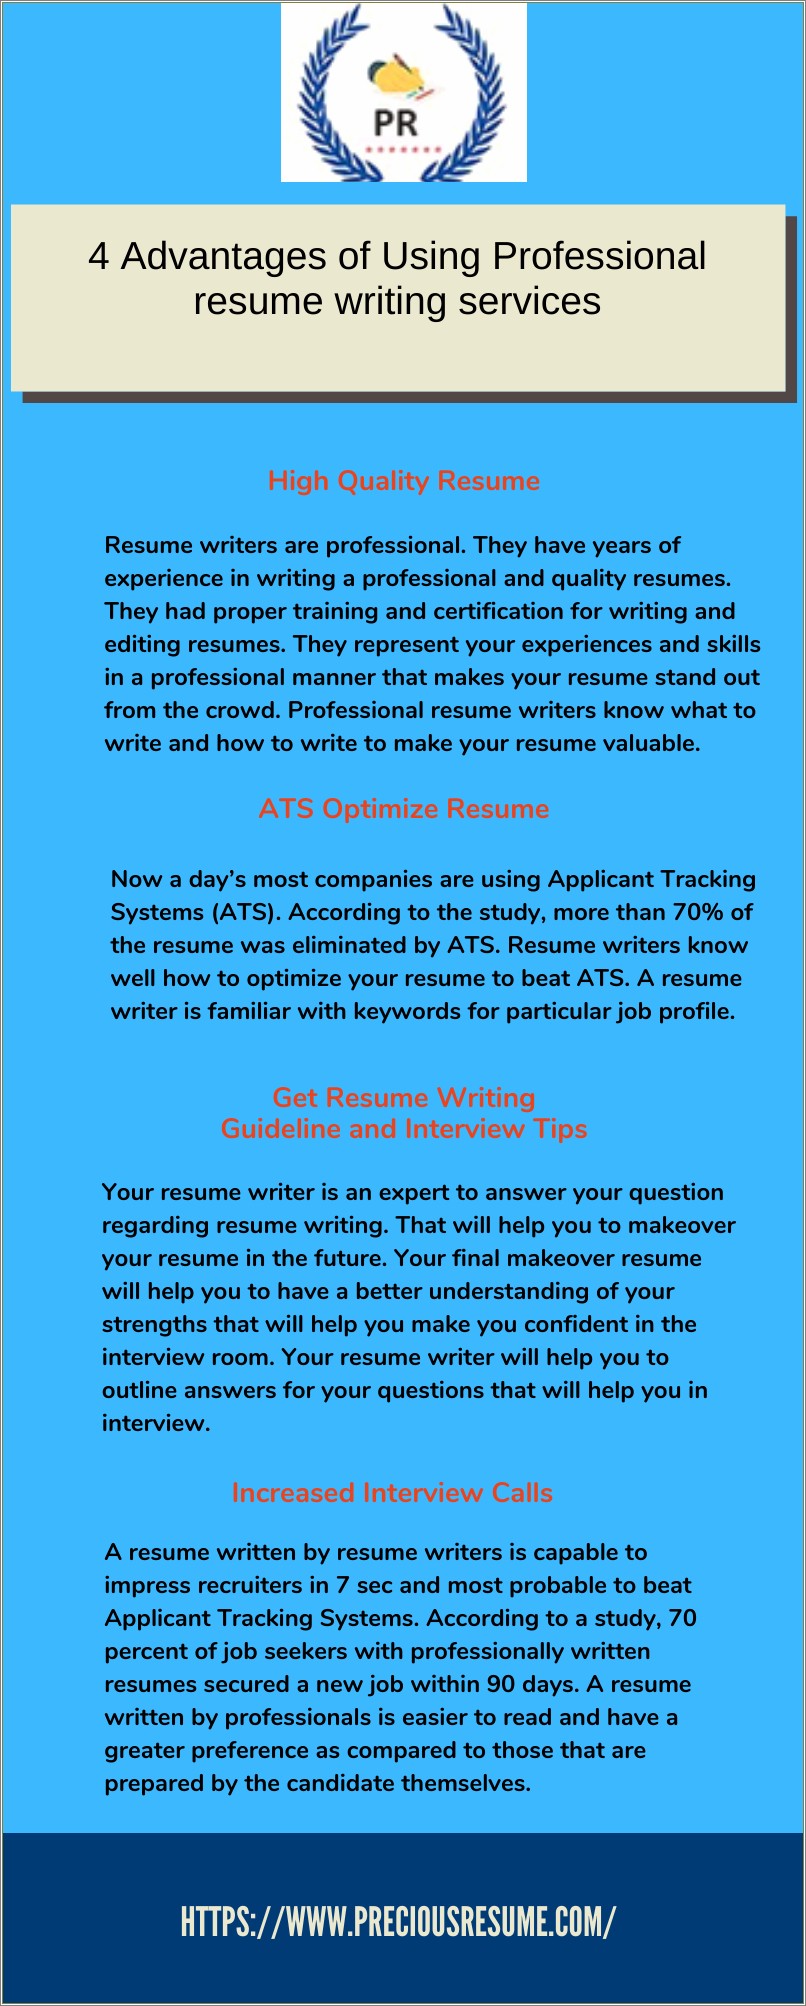 Does Job Service Help With Resume Writing